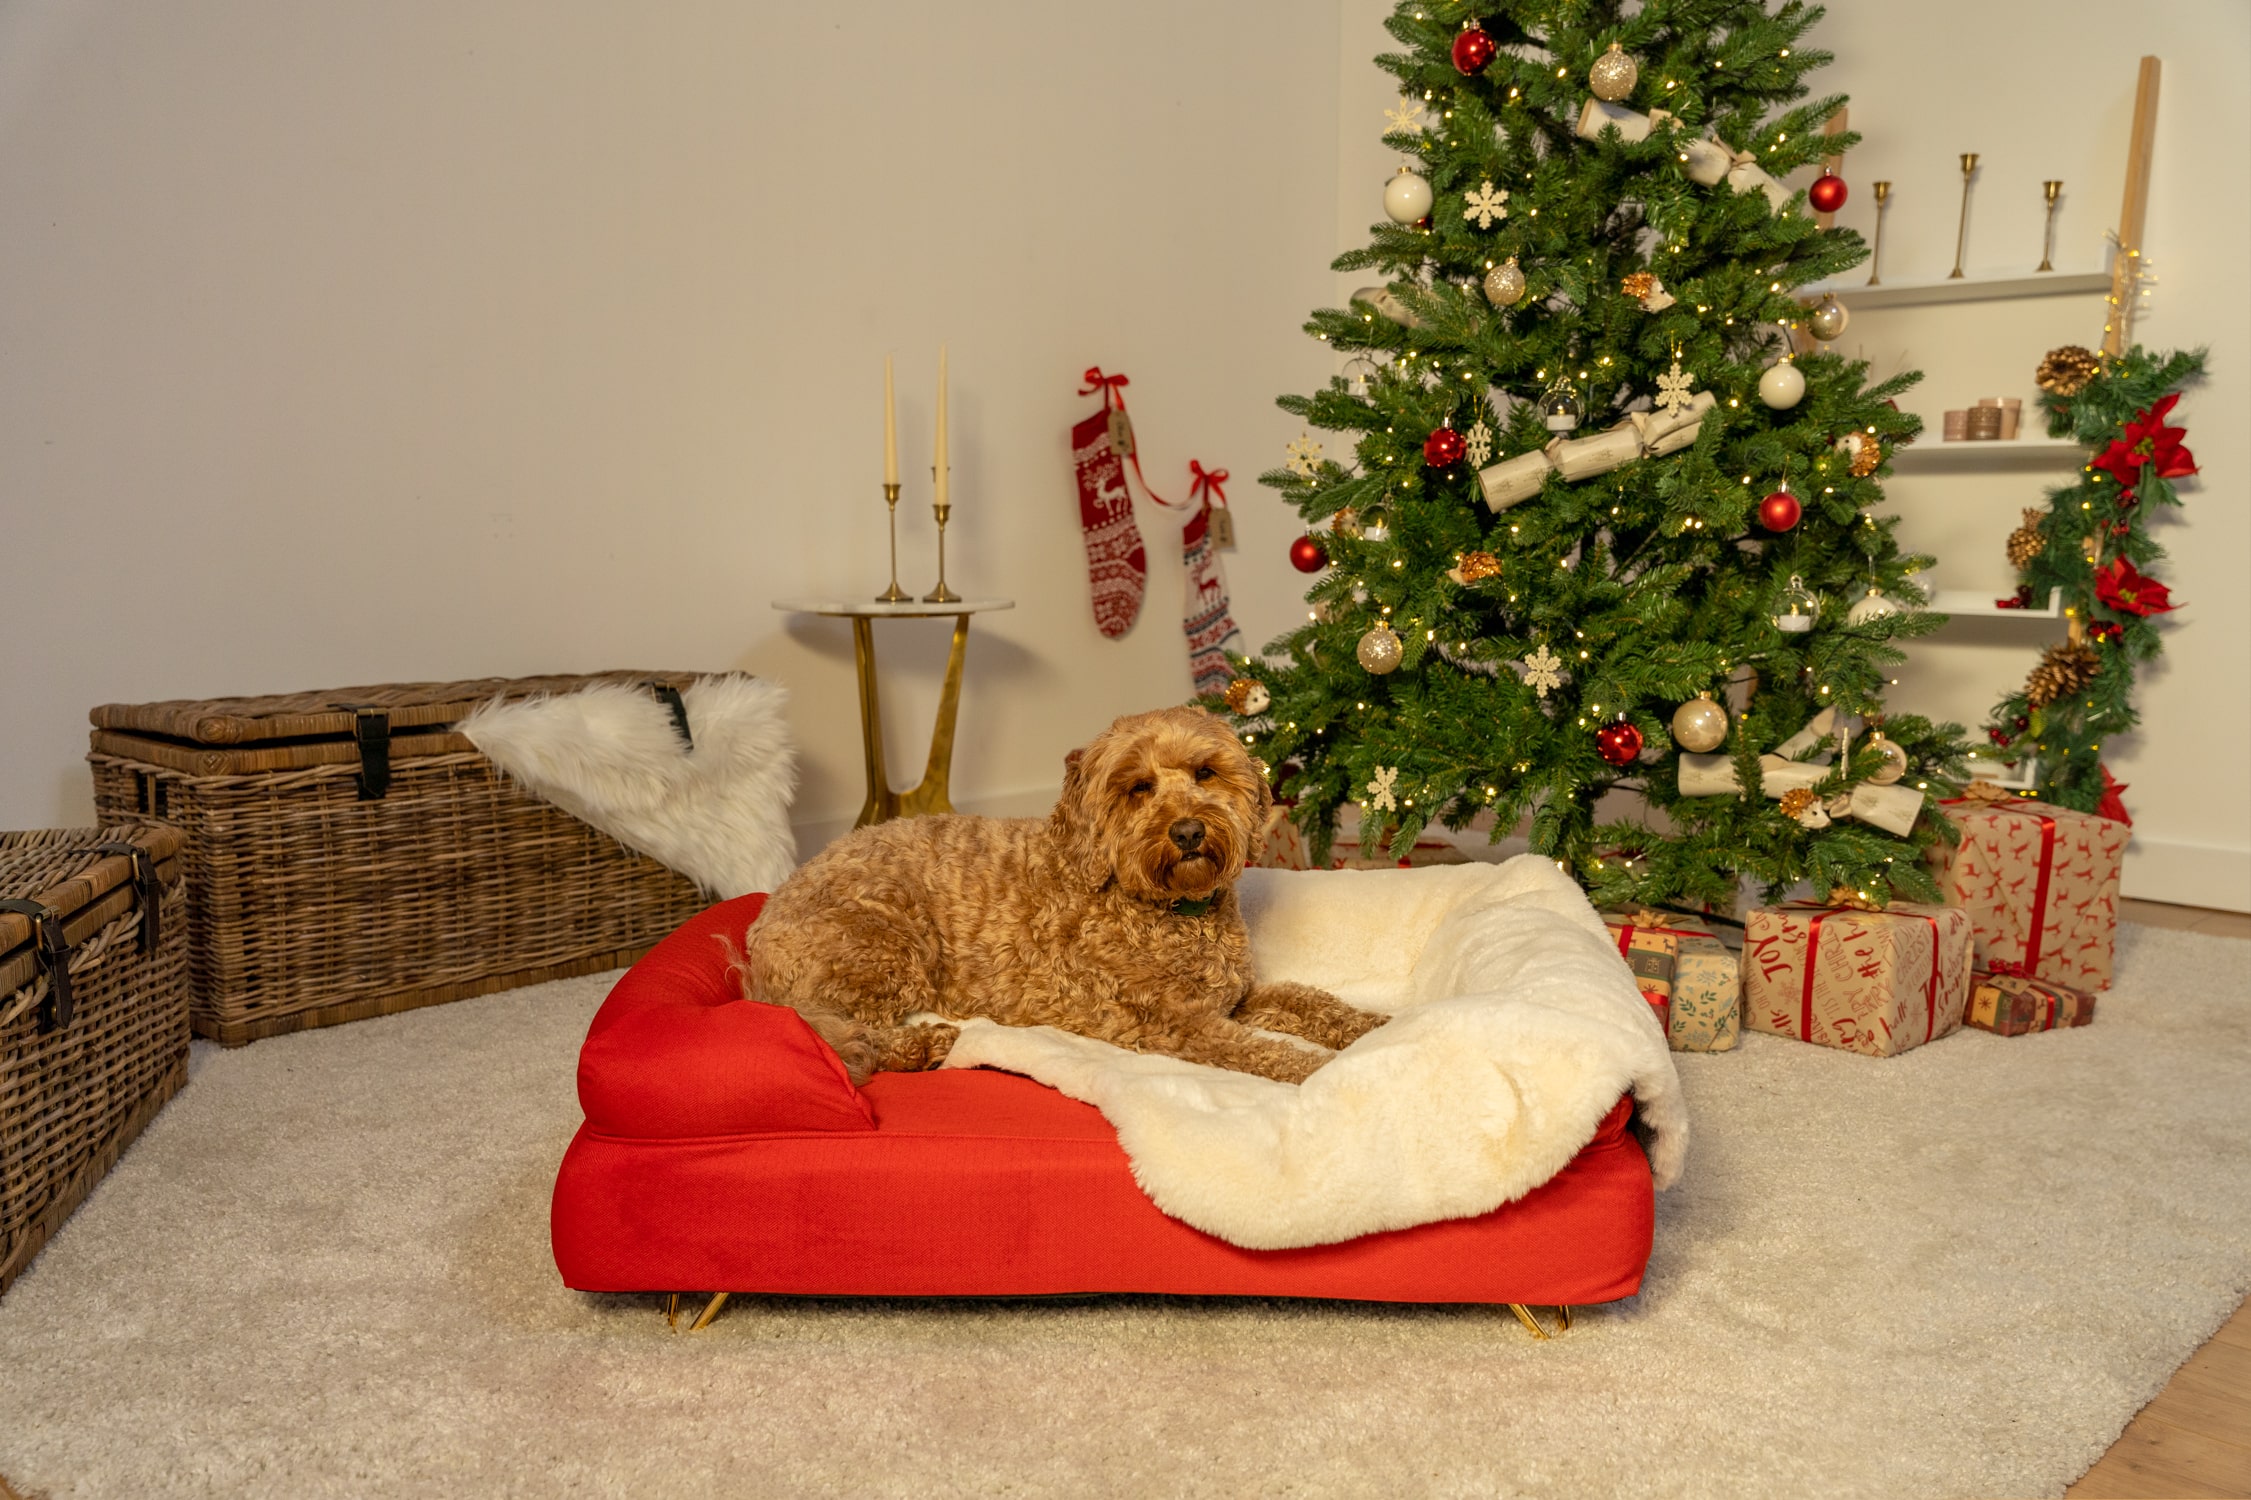 Dog lying on Omlet Bolster Dog Bed in Cherry Red by Christmas tree